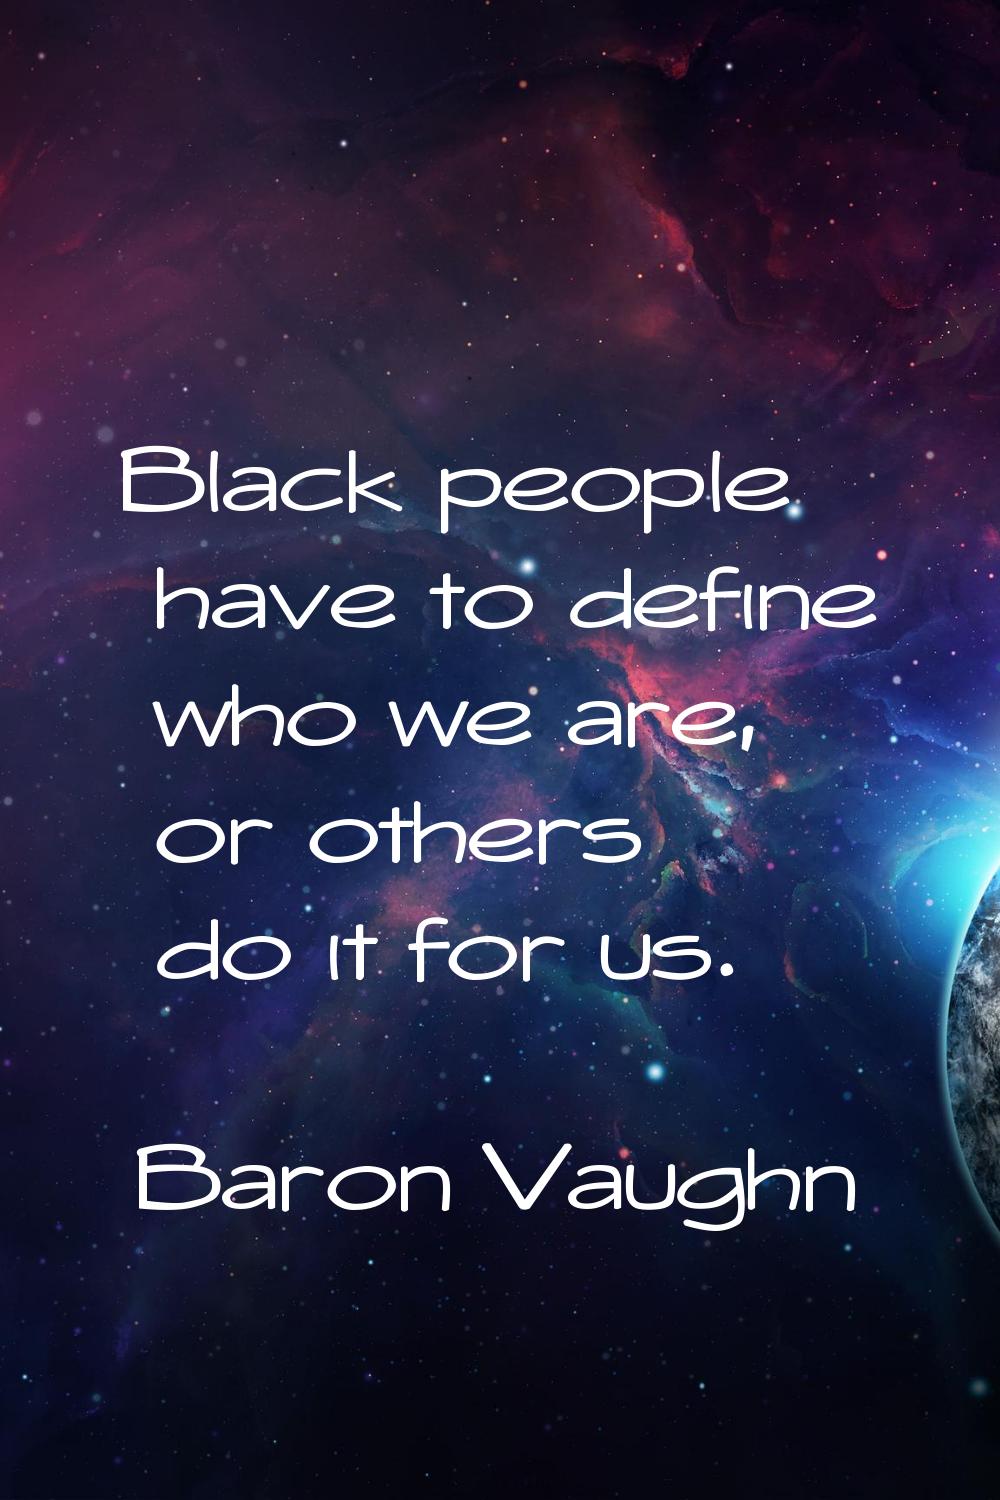 Black people have to define who we are, or others do it for us.